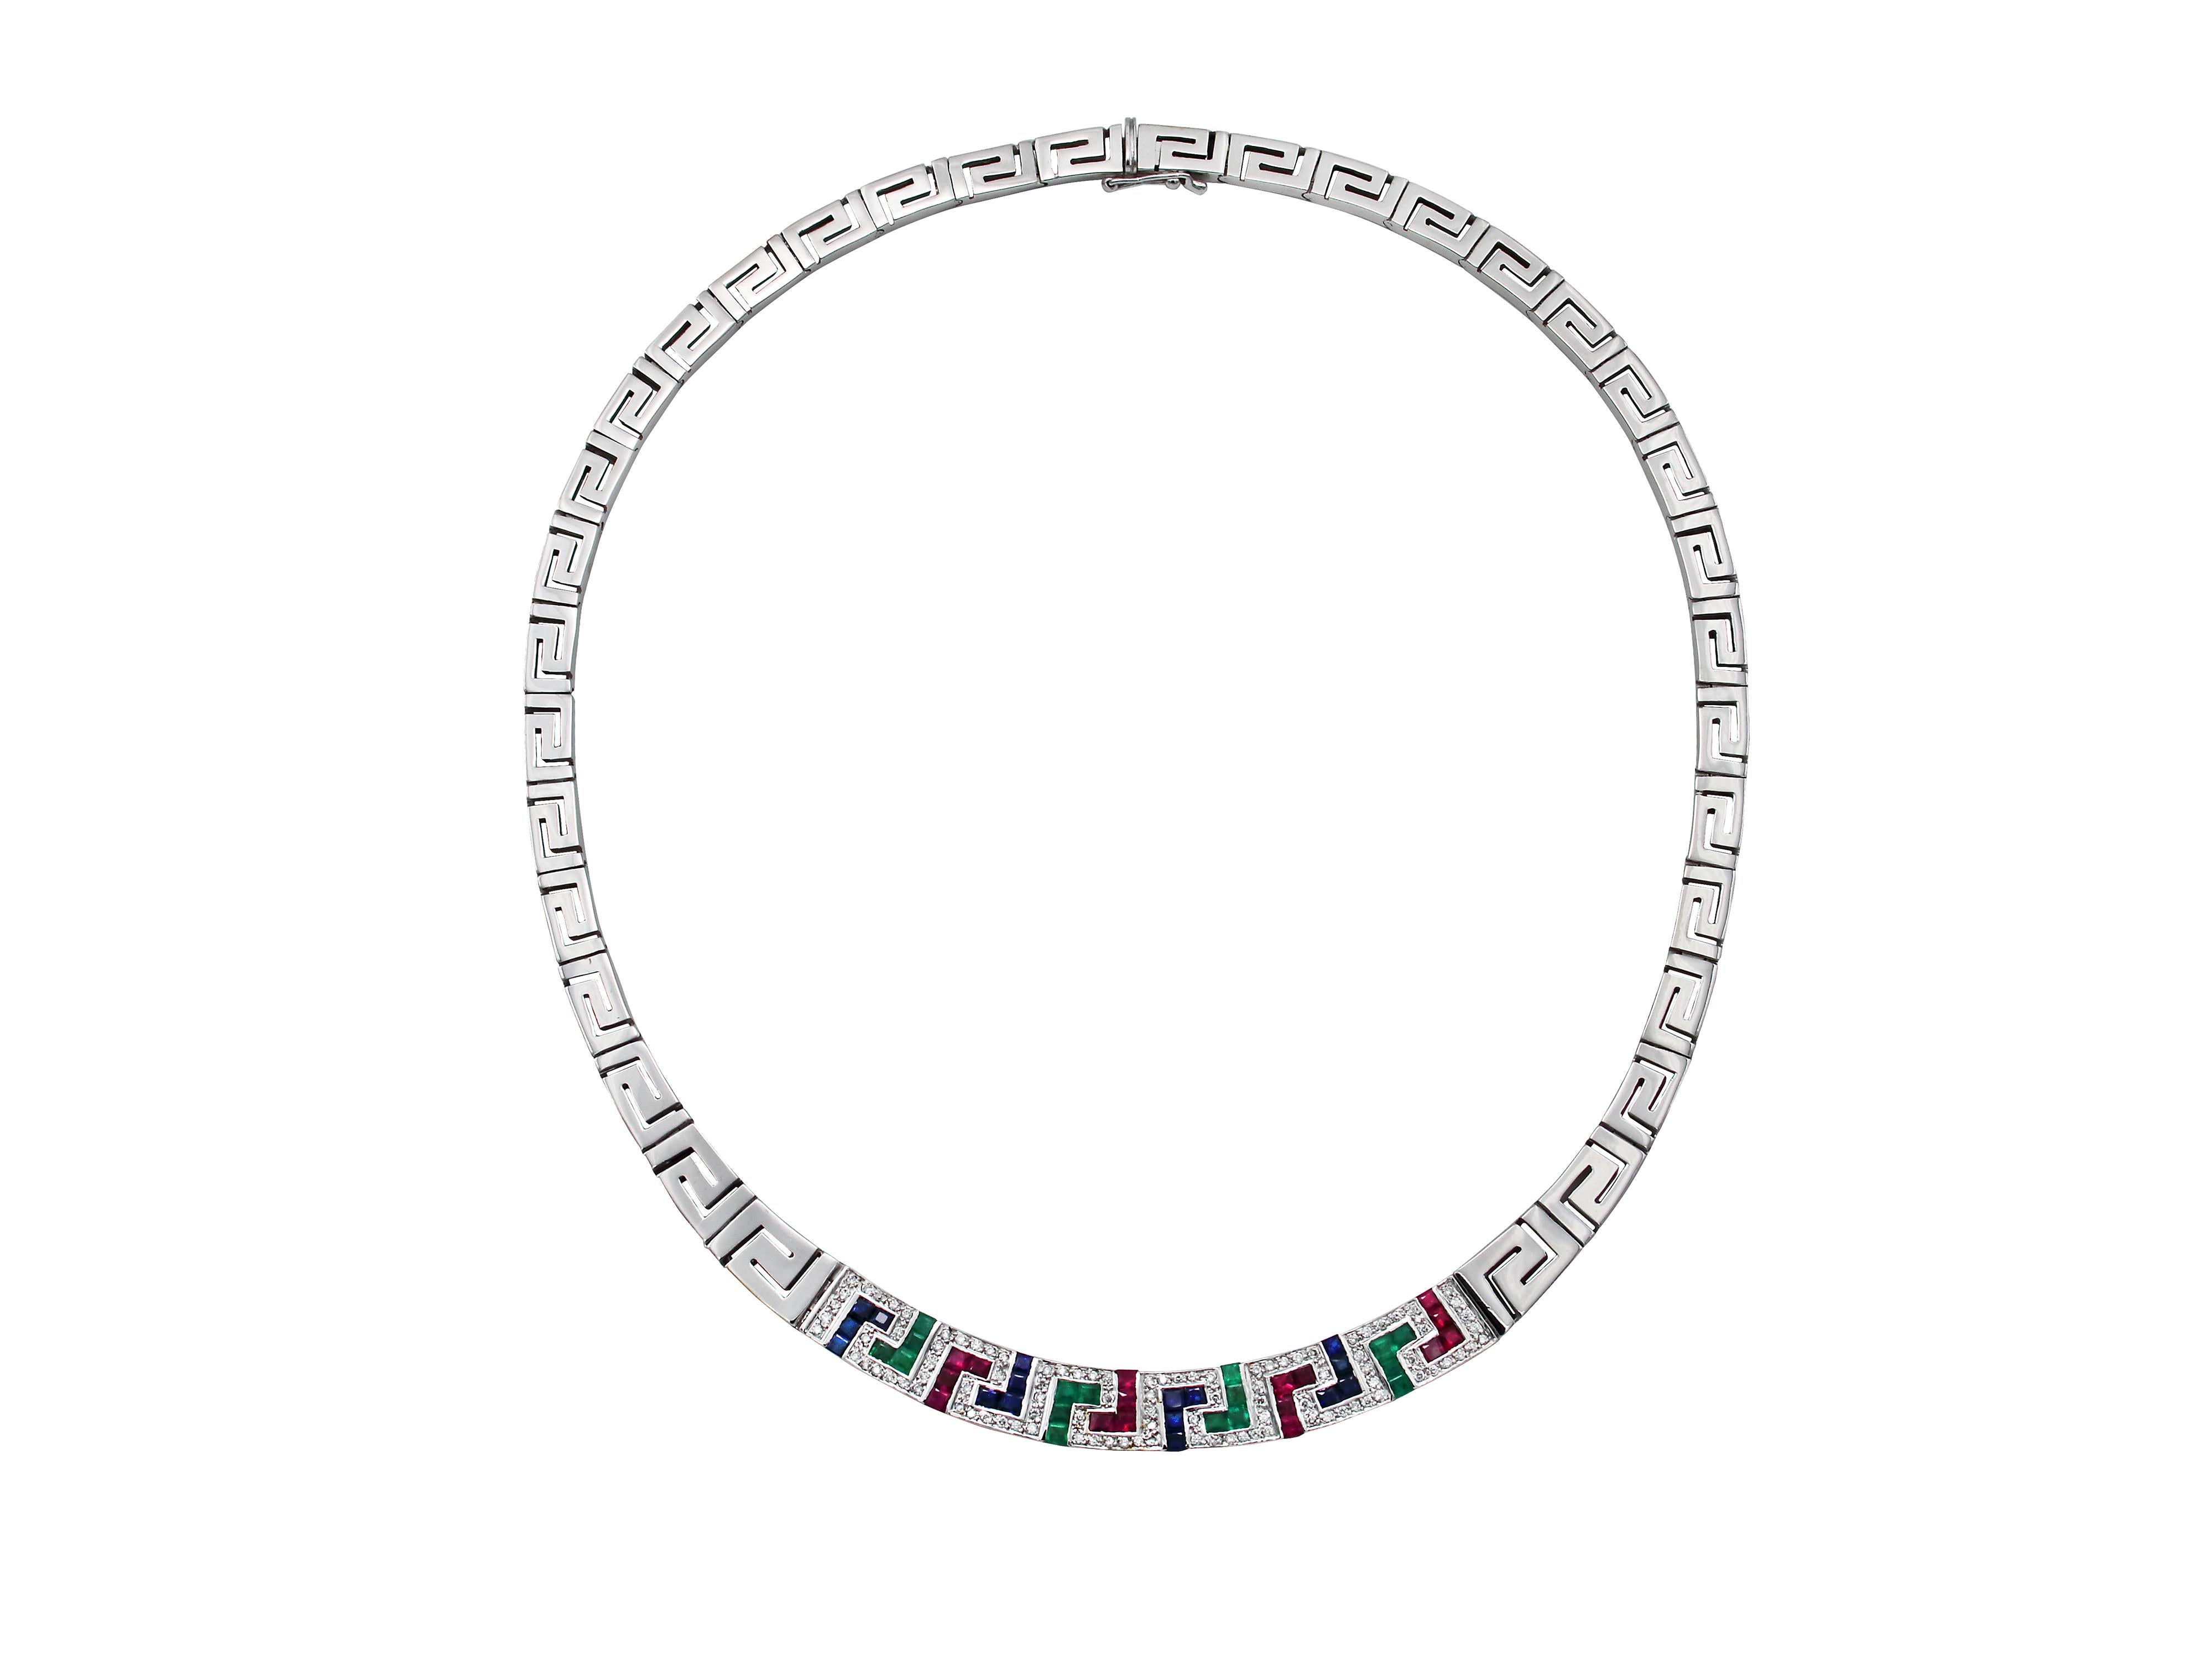 Happy Greek key collection. This necklace in 18 karats white gold it’s one of the most recognizable designs worldwide. Recognizable for its Greek origin but also known as the symbol of the long life. The technical name of it is Meander. Known as the